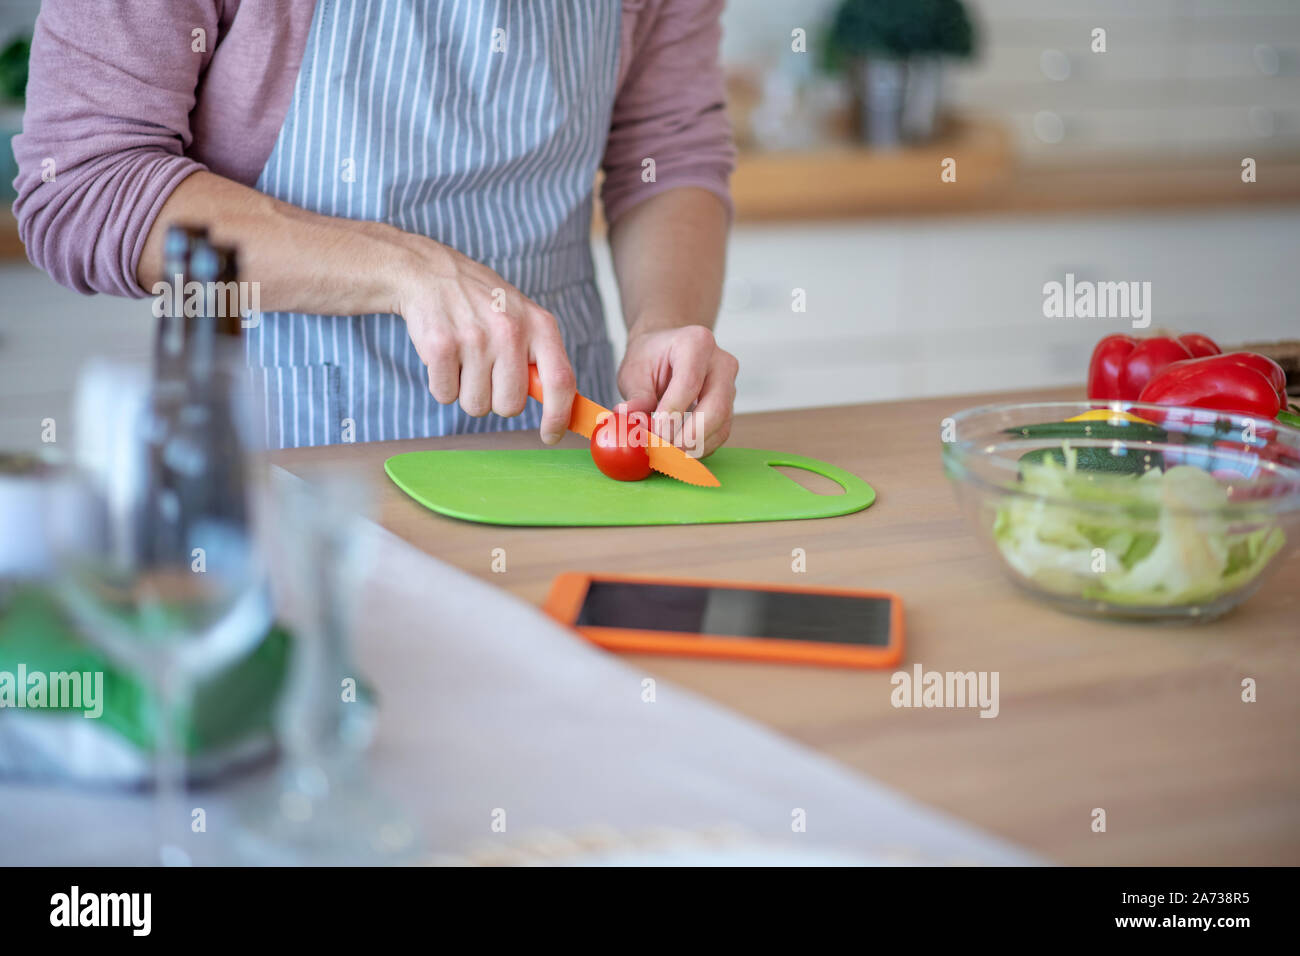 Close up of man slicing tomatoes salade pendant la cuisson Banque D'Images